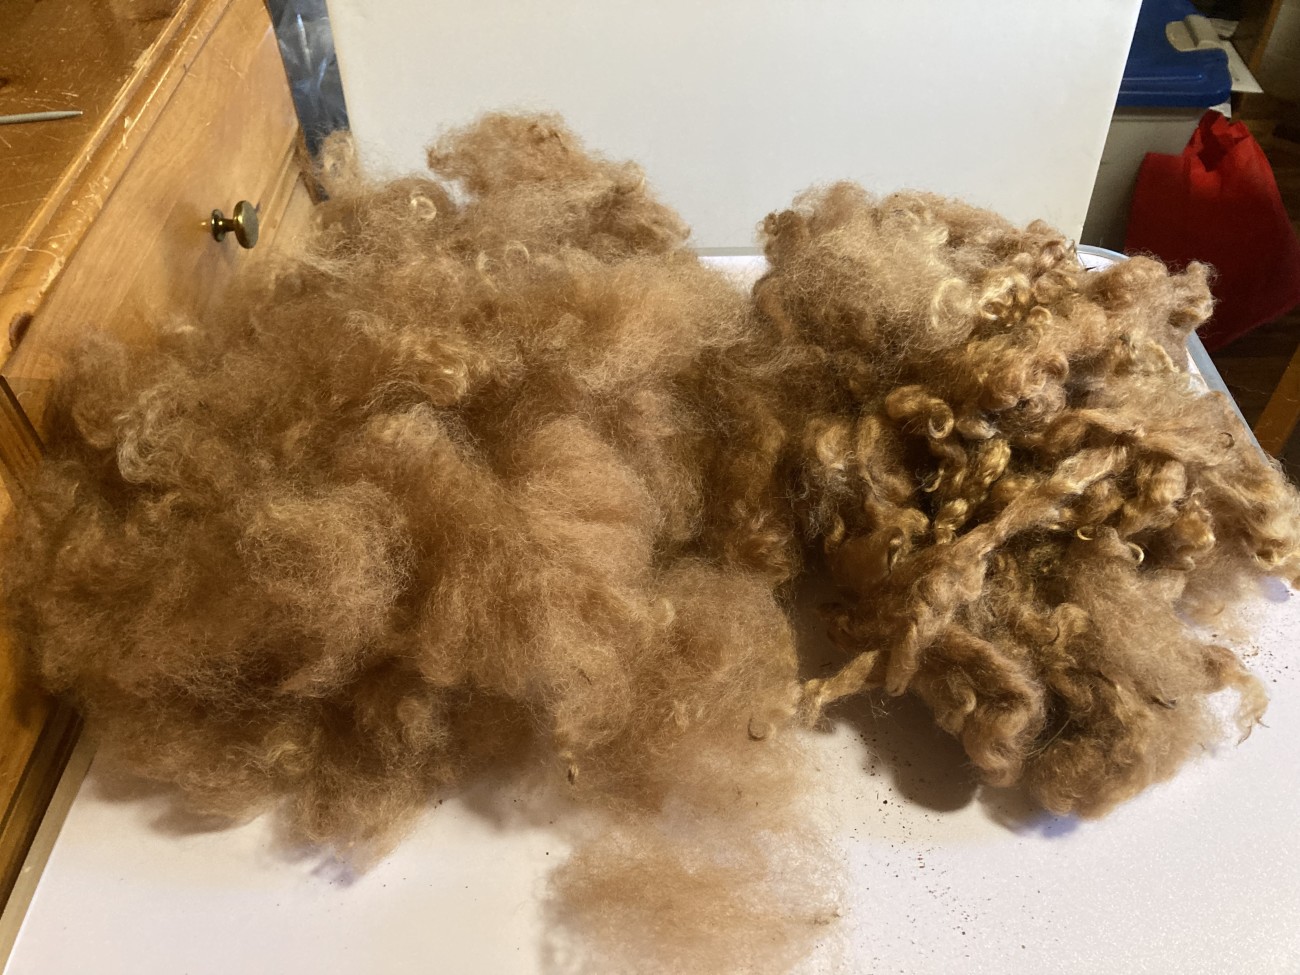 Freshly dyed wool and silk